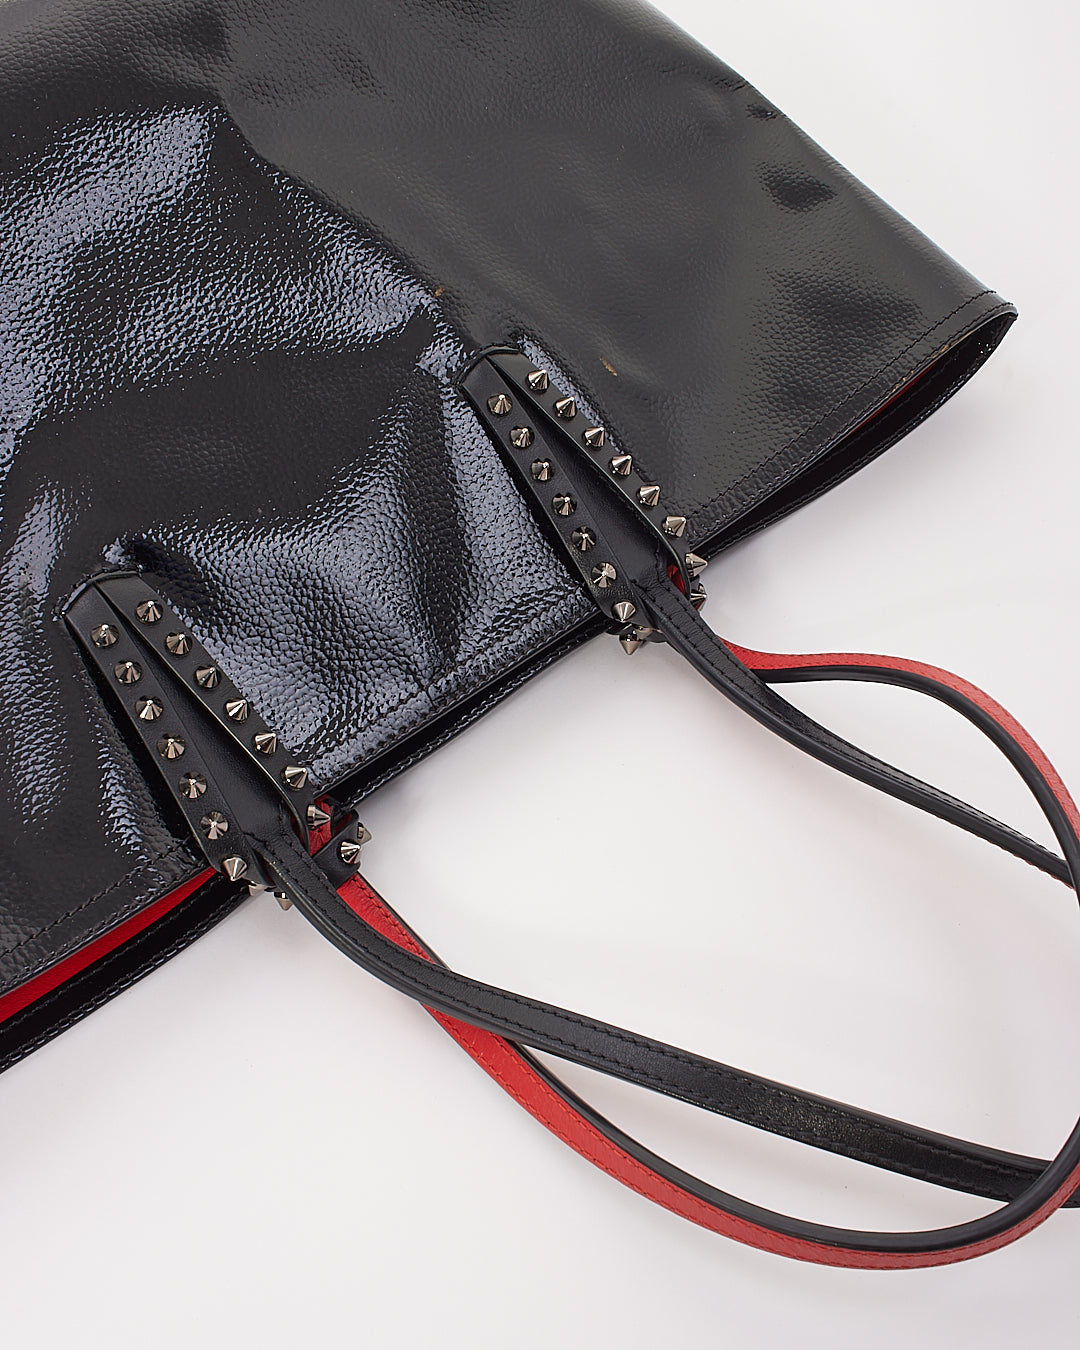 Christian Louboutin Black Patent Studded Tote with Pochette